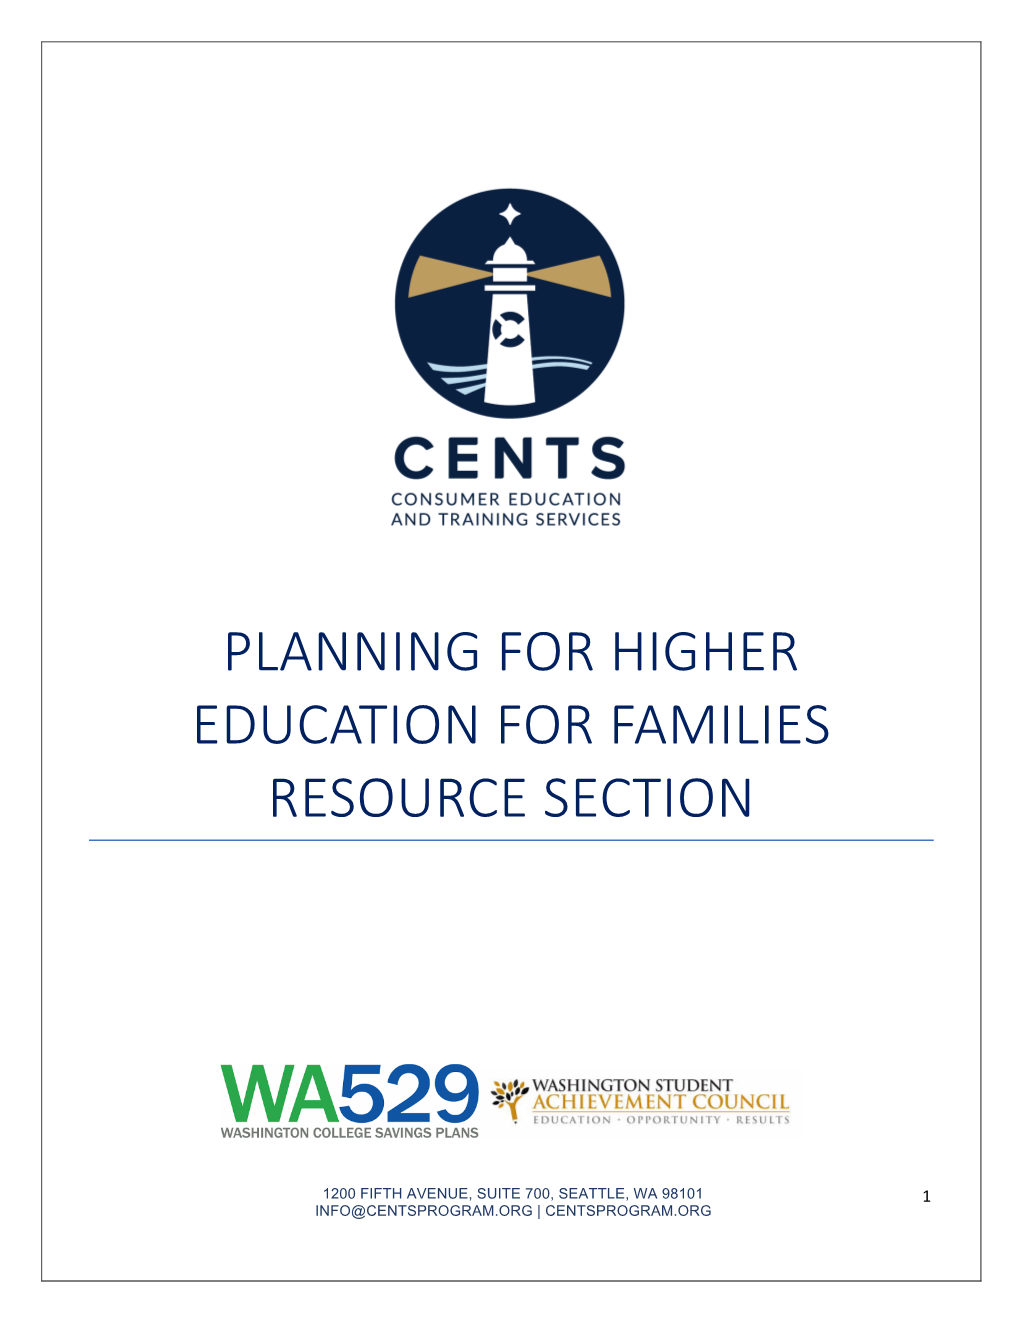 Planning for Higher Education for Families Resources